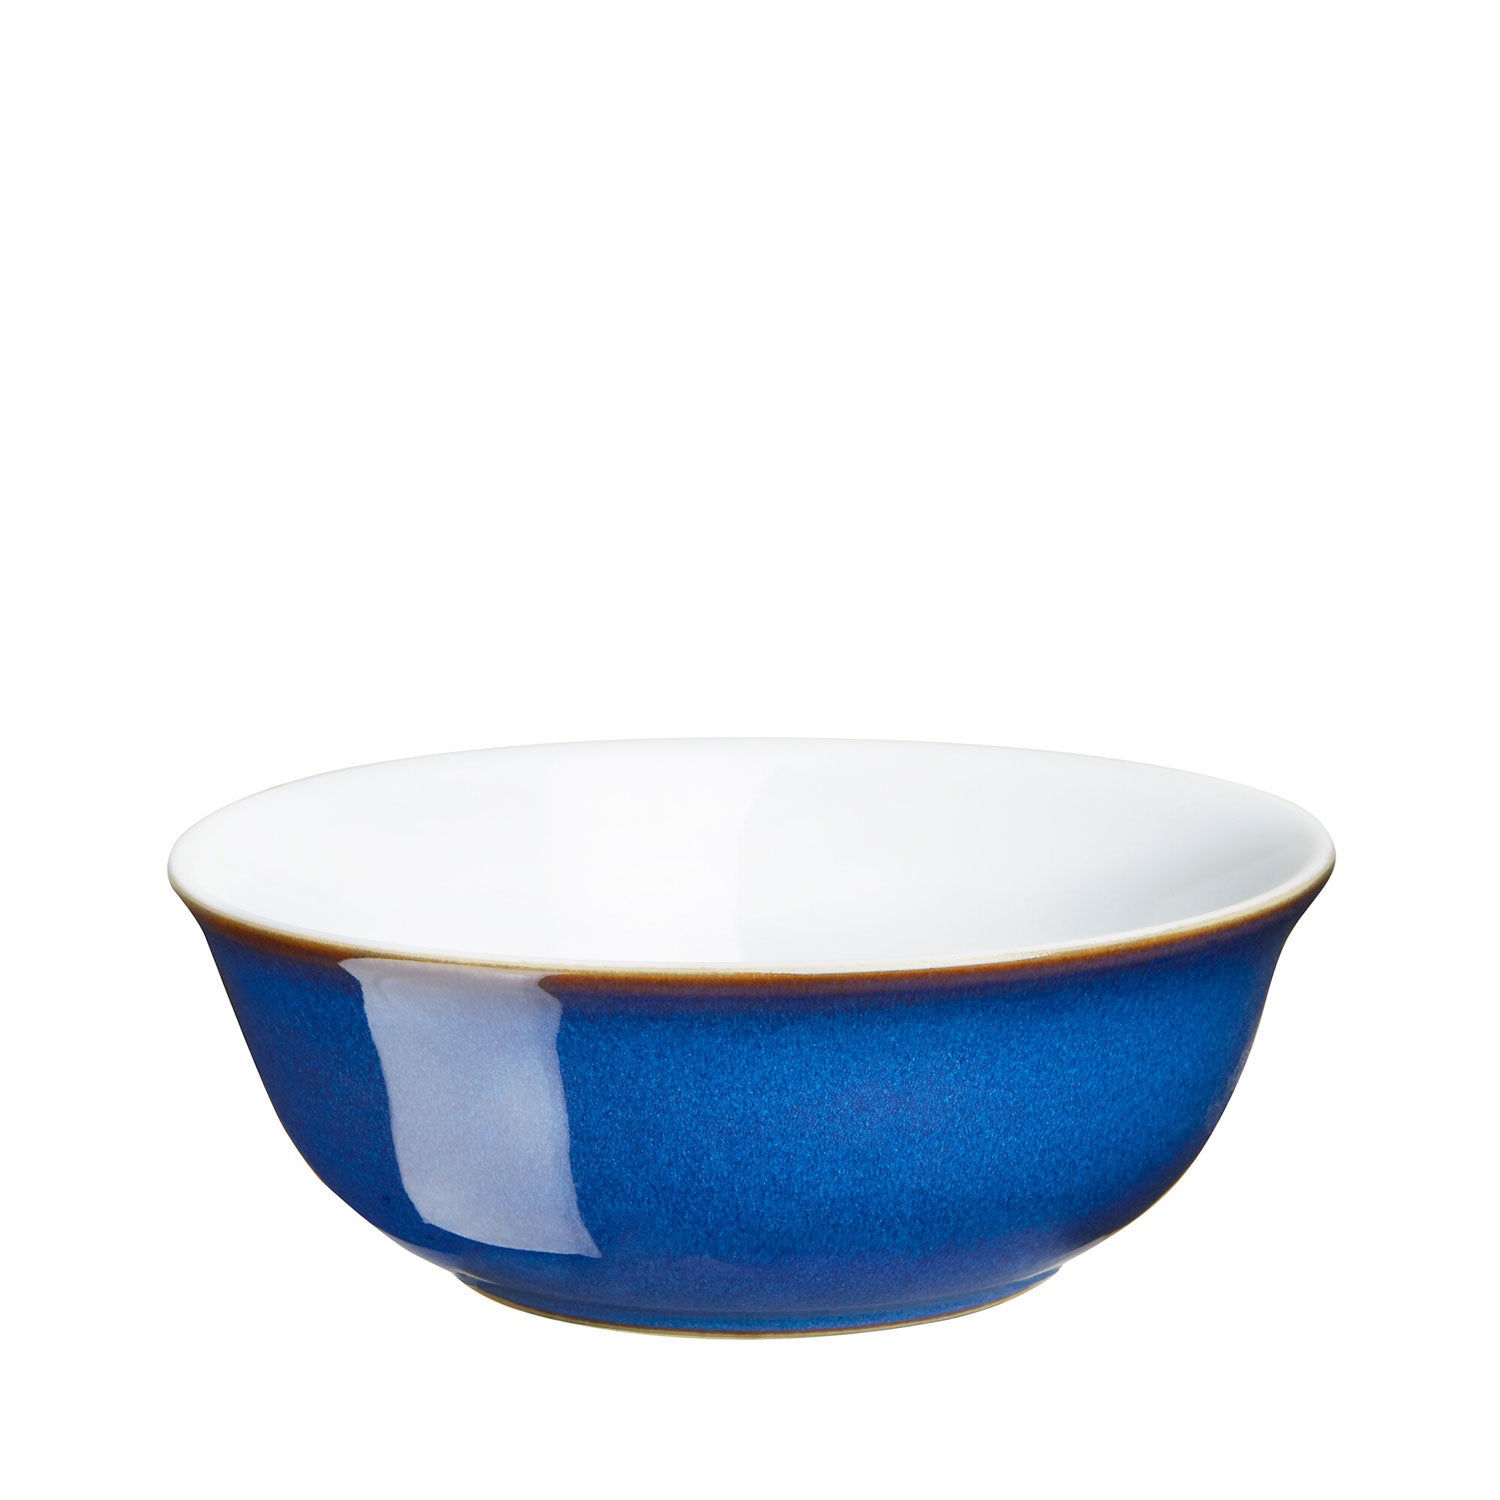 Denby Cereal Bowl - Imperial Blue 1 Shaws Department Stores